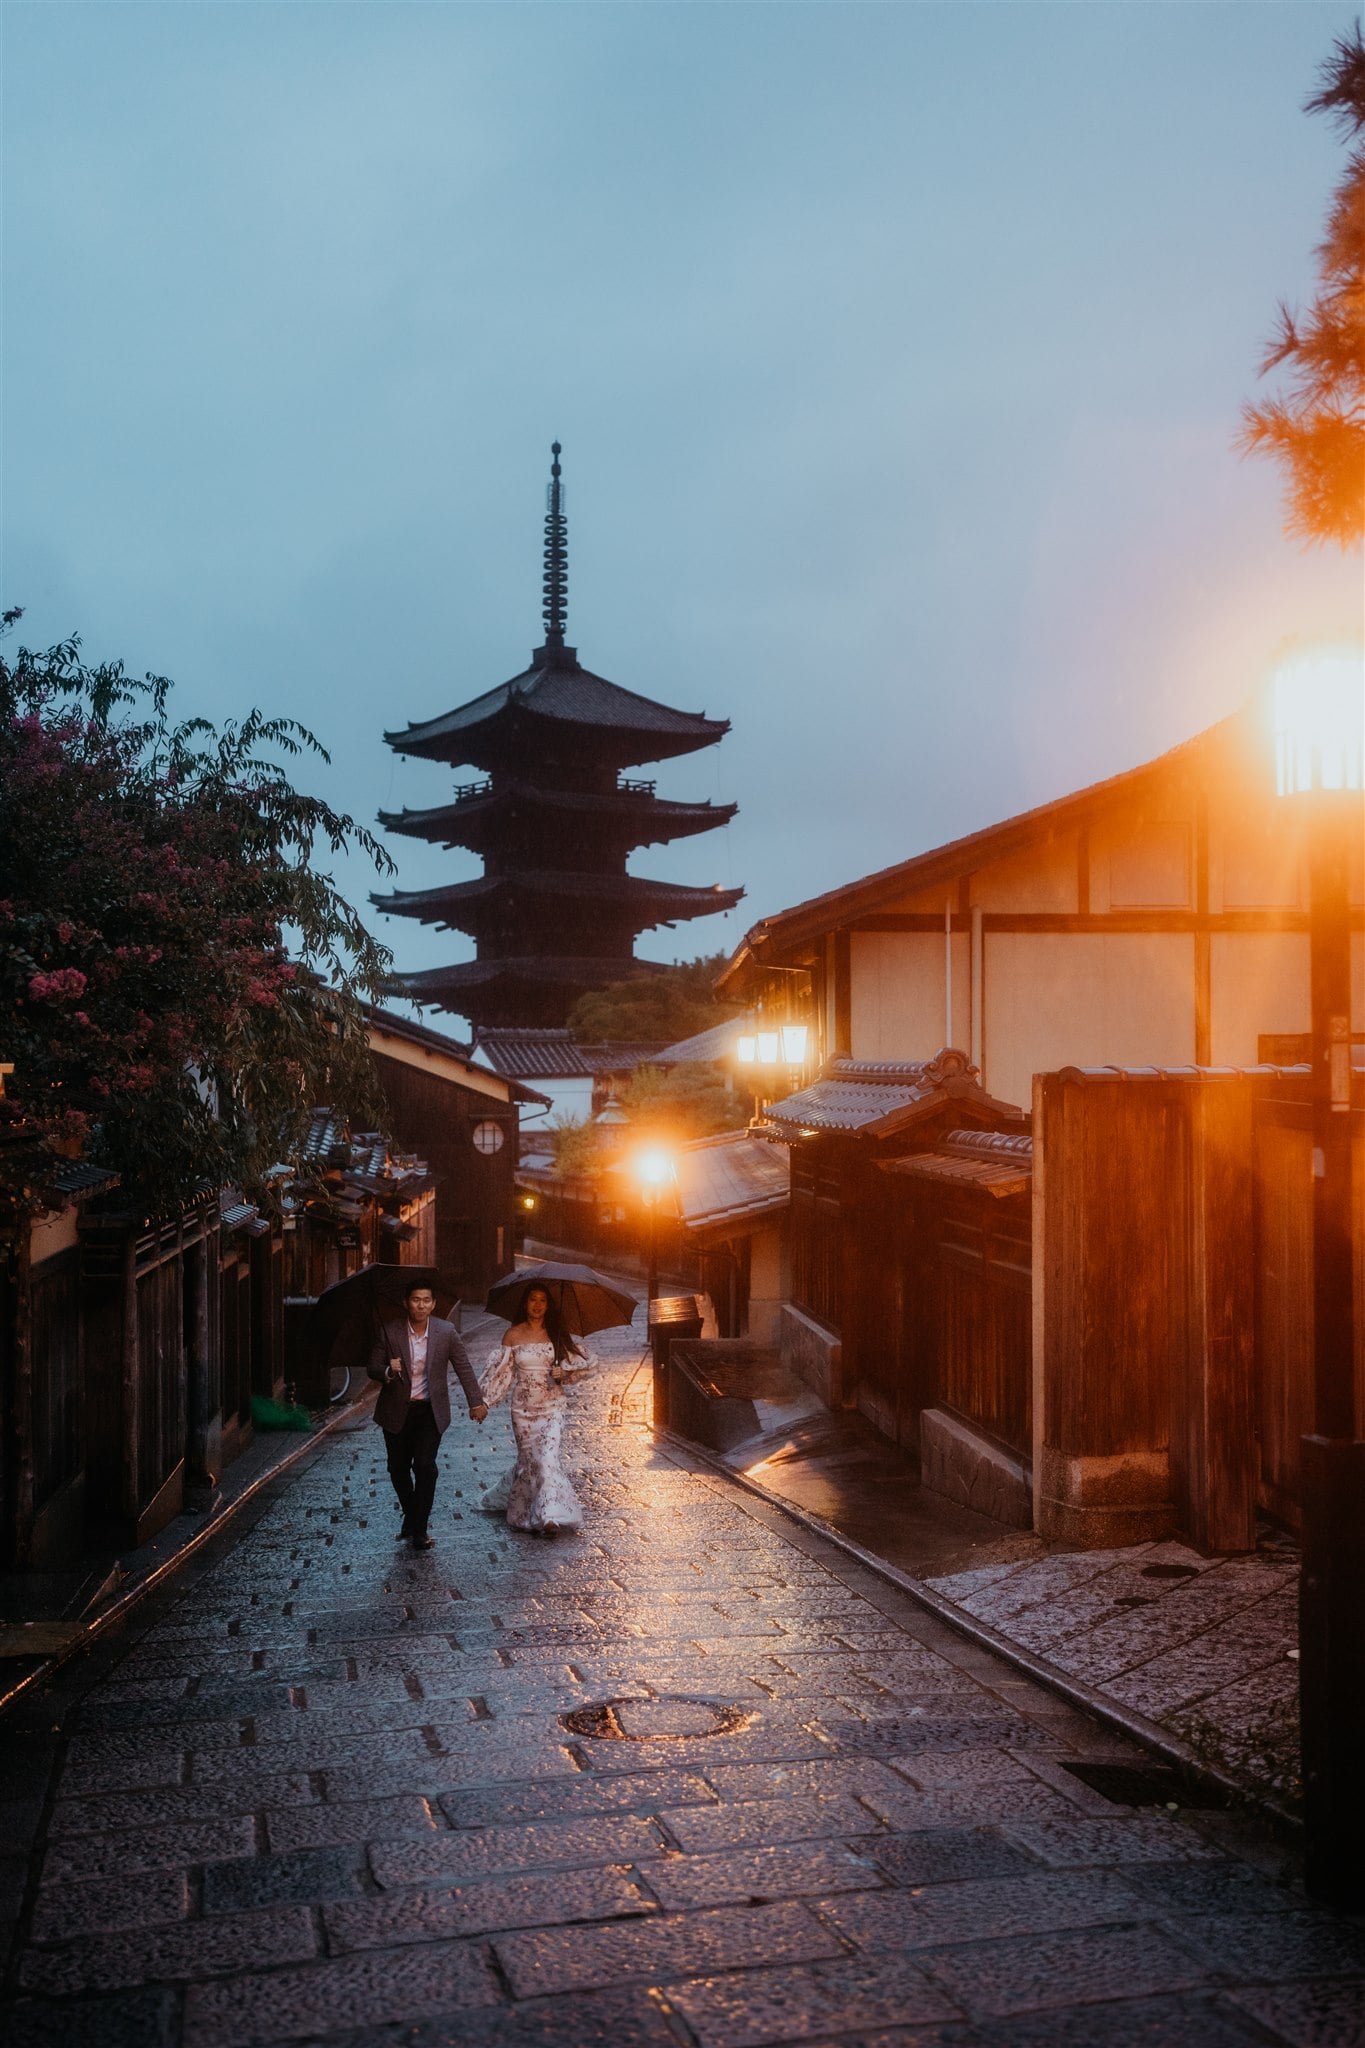 Bride and groom walk down the streets in Kyoto during blue hour